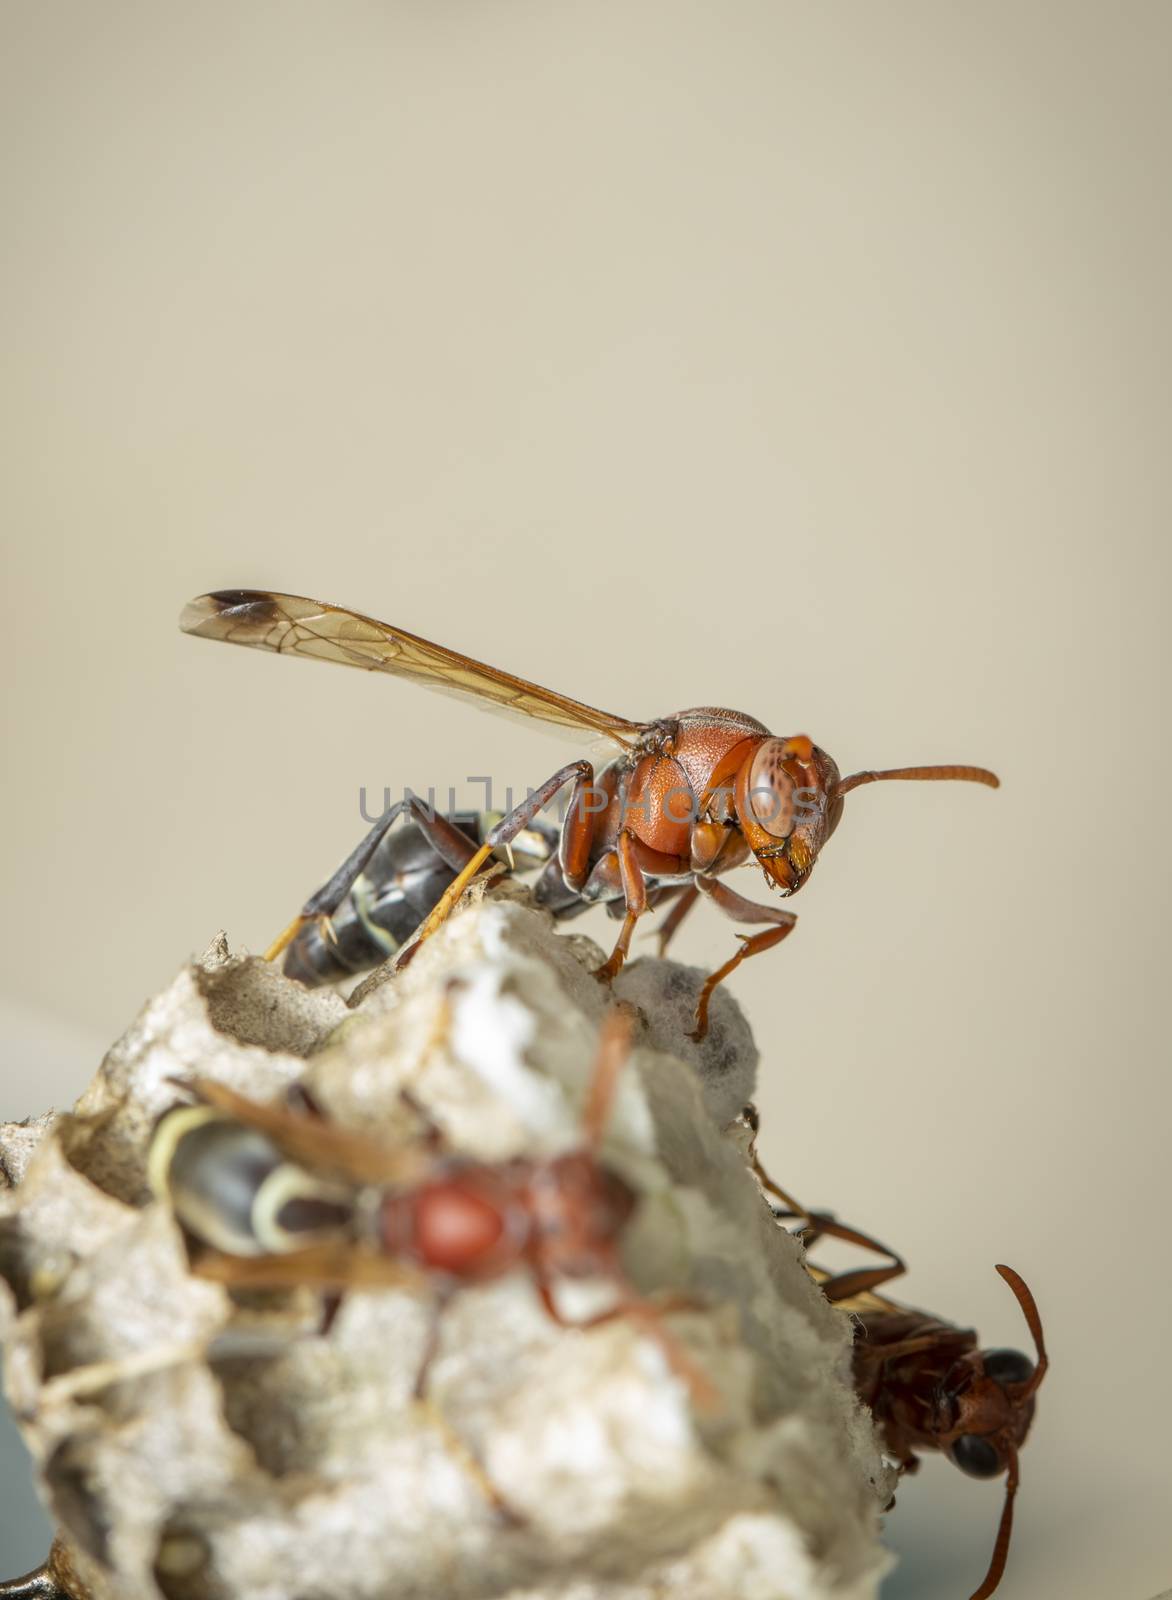 Image of Common Paper Wasp / Ropalidia fasciata and wasp nest on by yod67